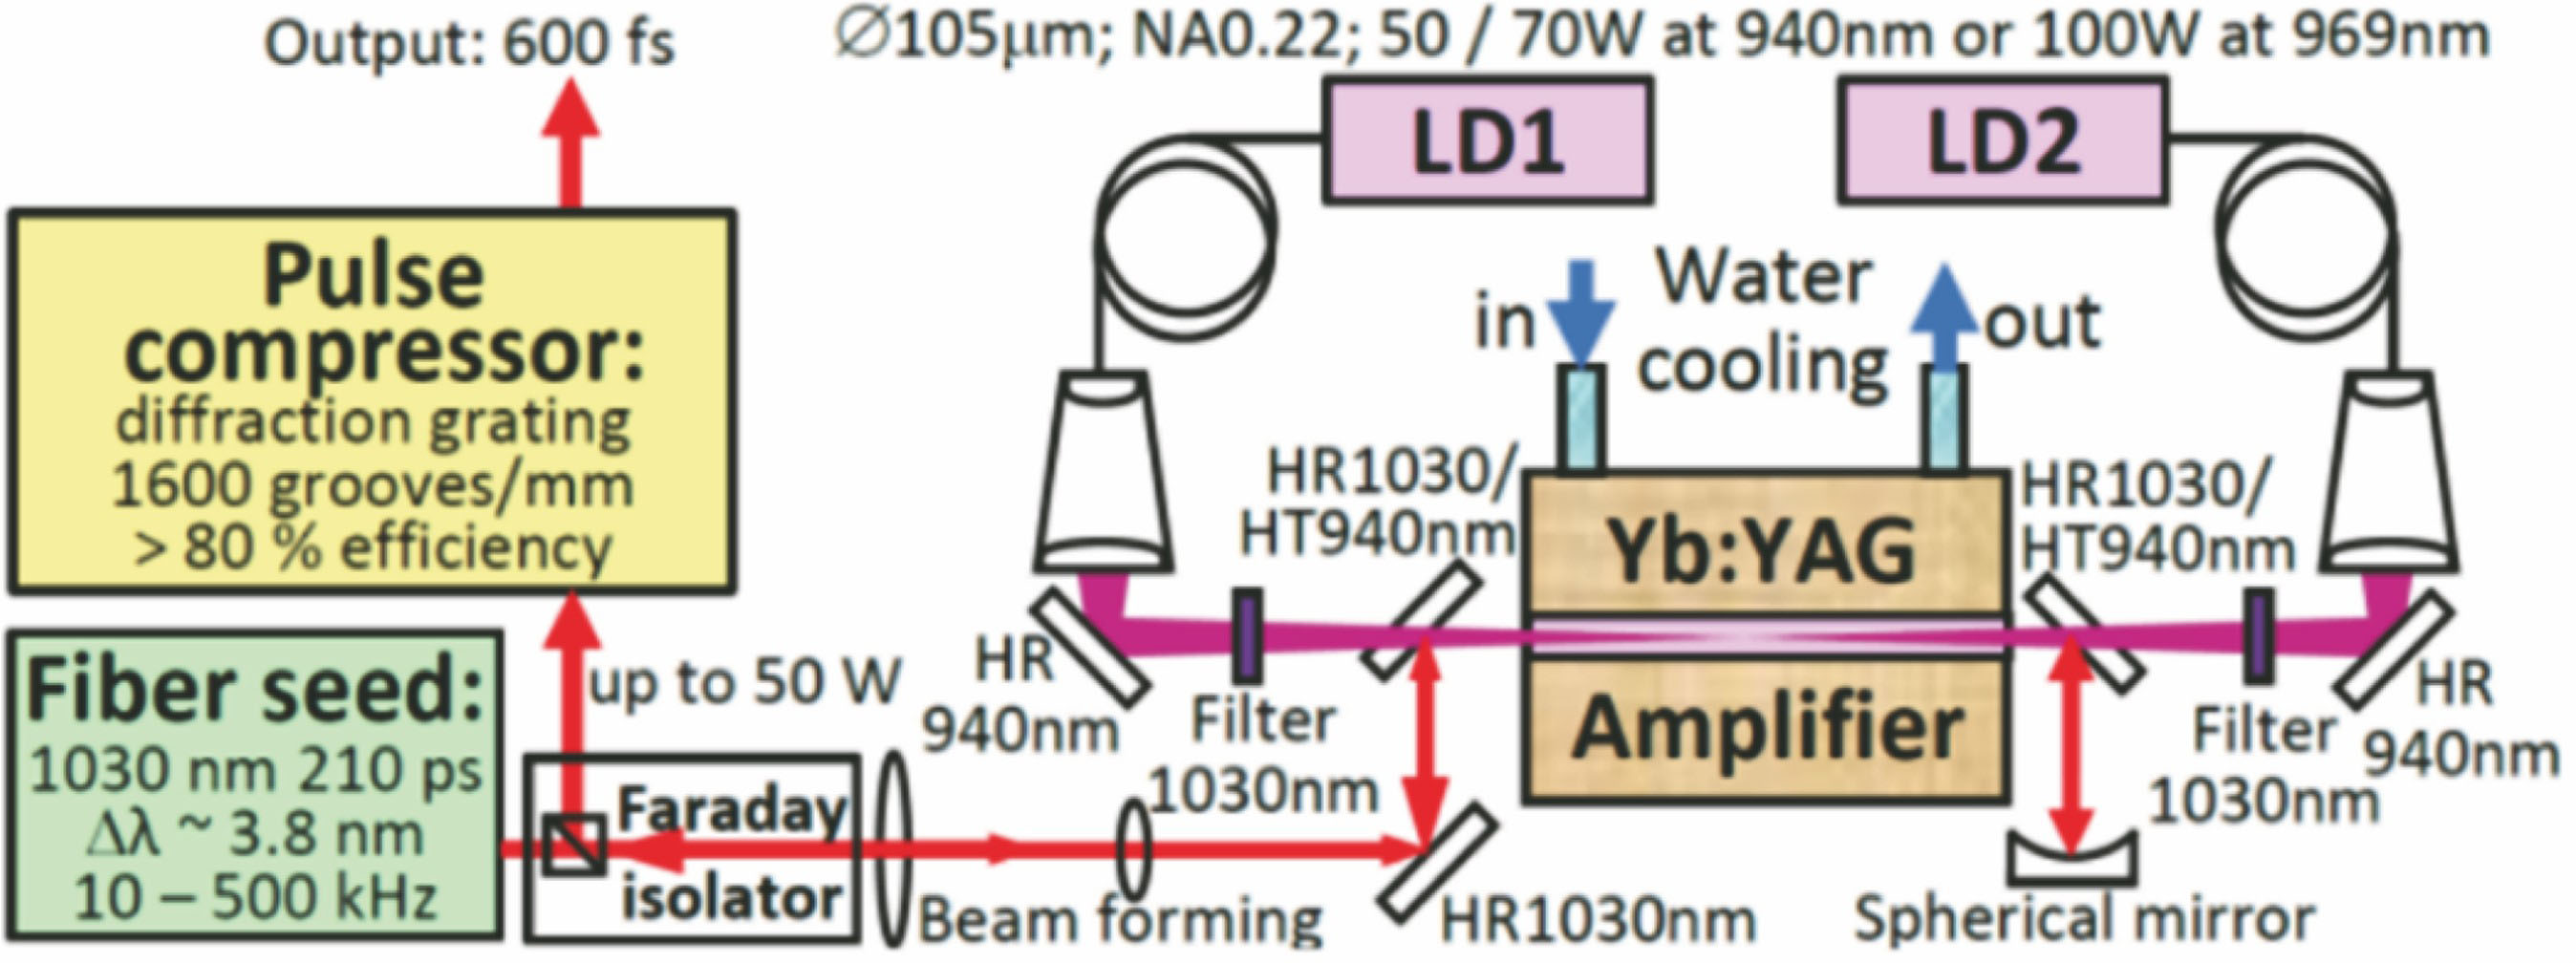 Experimental setup for two-pass Yb∶YAG chirped pulse amplification[20]